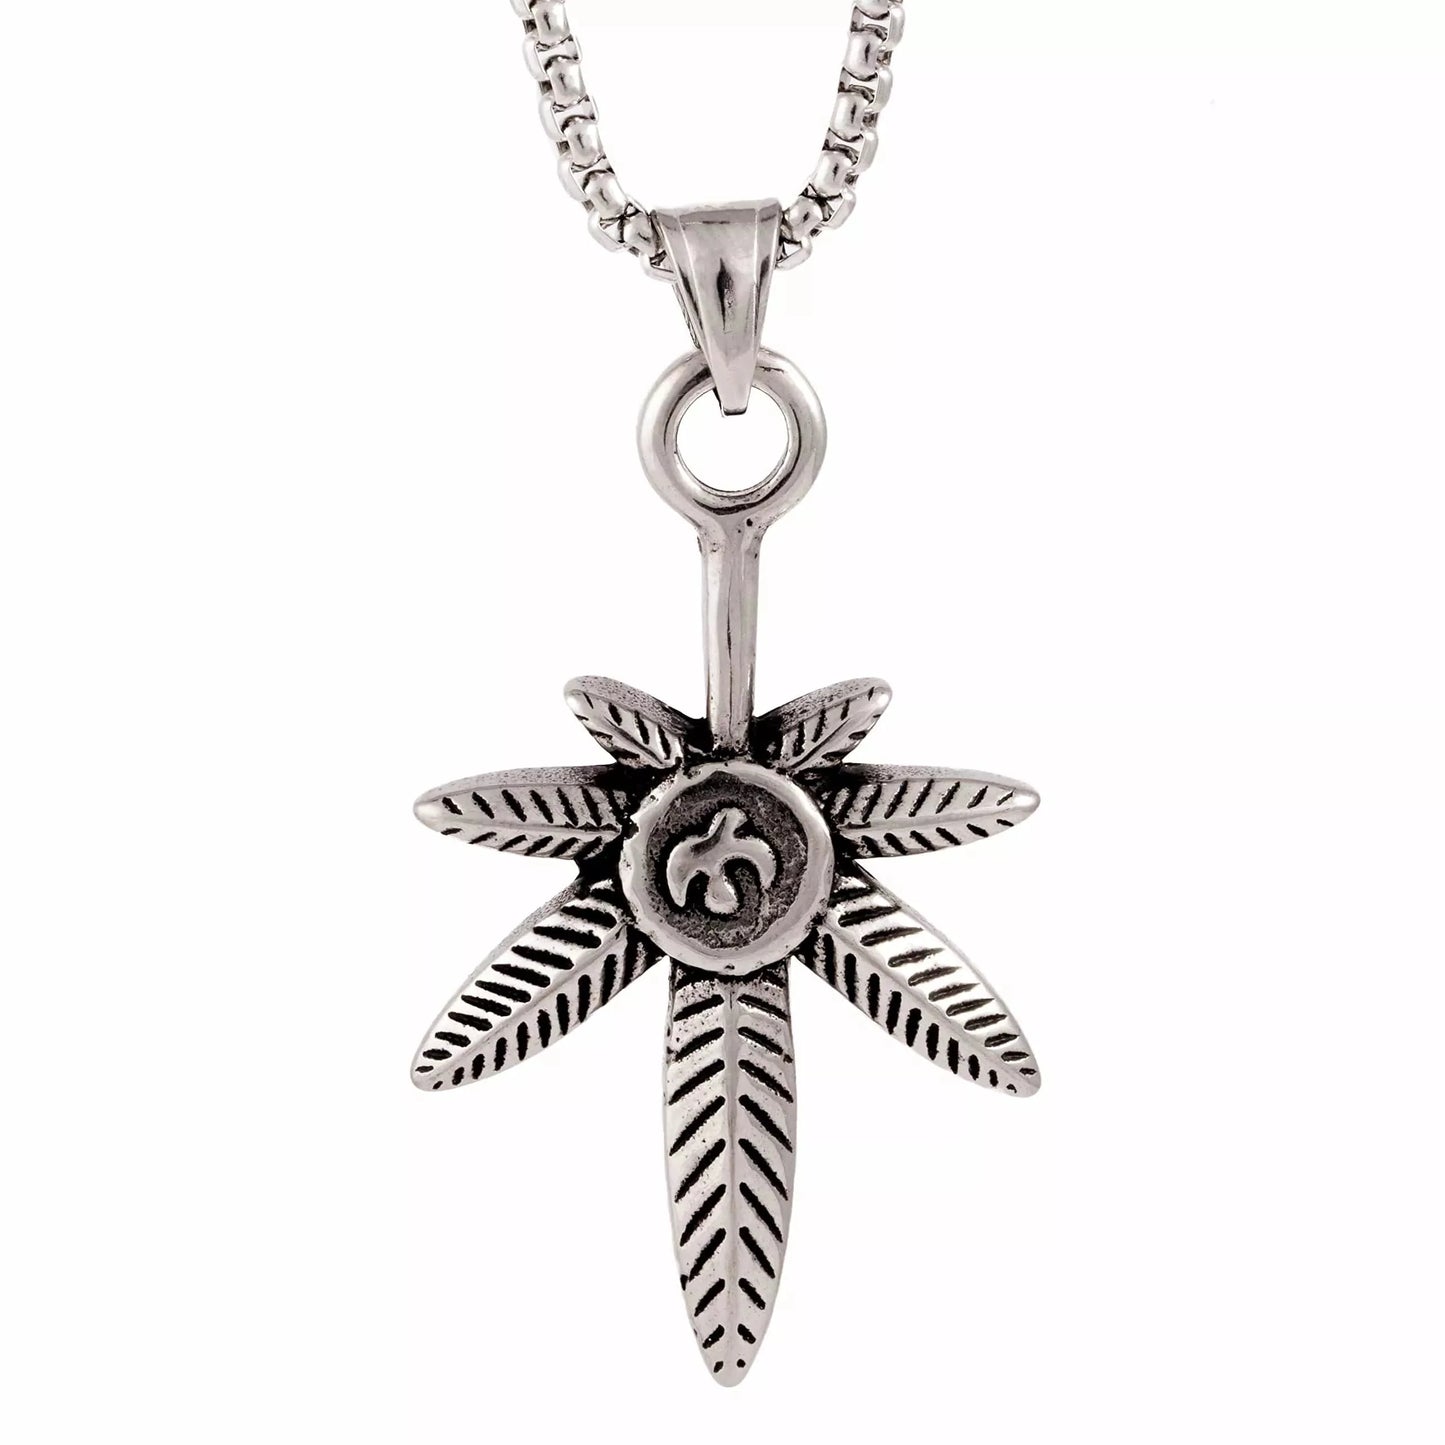 THE MEN THING Pendant for Men - Pure Titanium Steel Leaf Pendant with 24inch Round Box Chain for Men & Boys